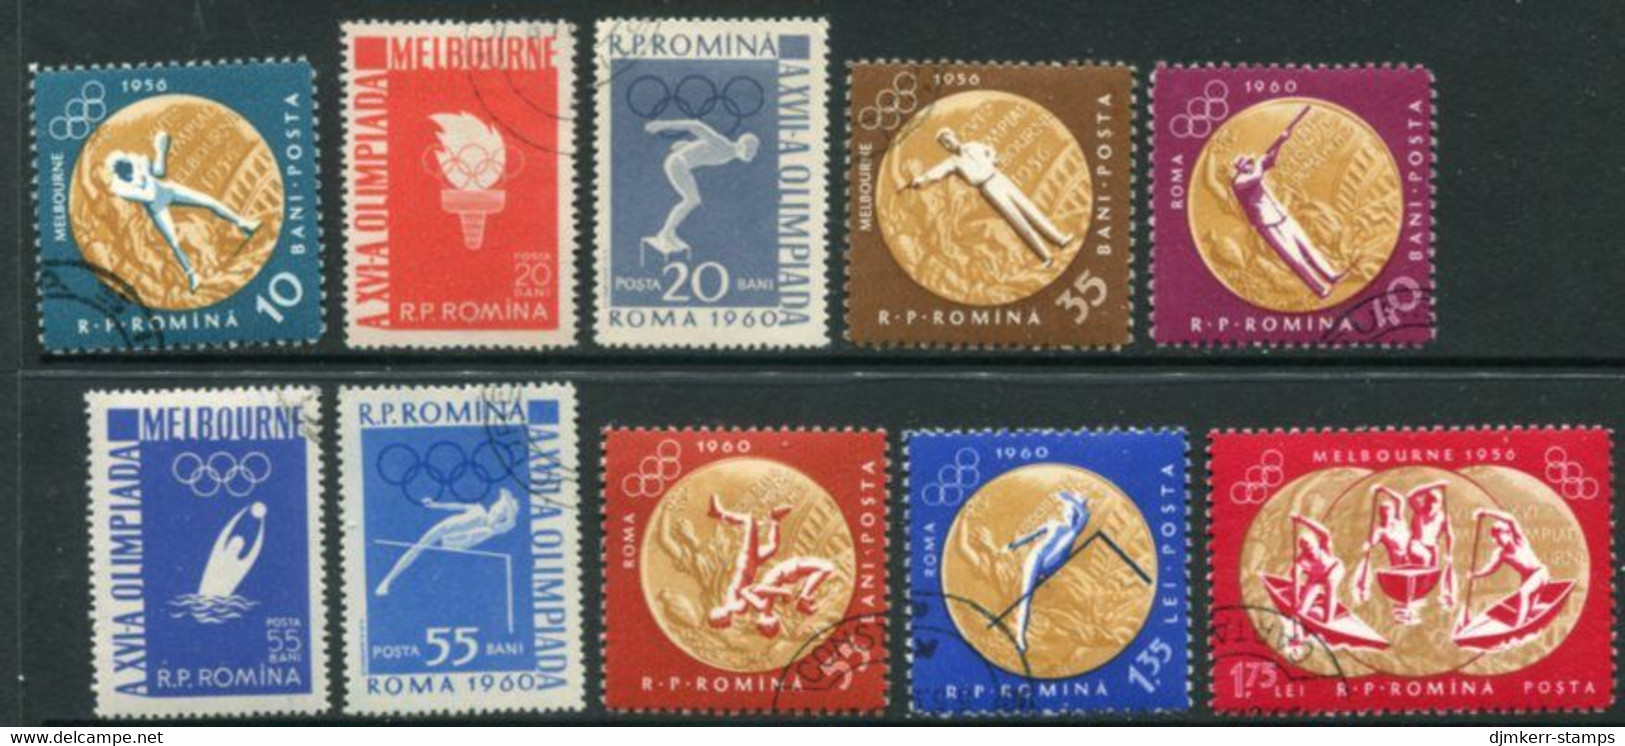 ROMANIA 1961 Melbourne Olympic Games  Perforated Used.  Michel 2010A-19A - Gebruikt